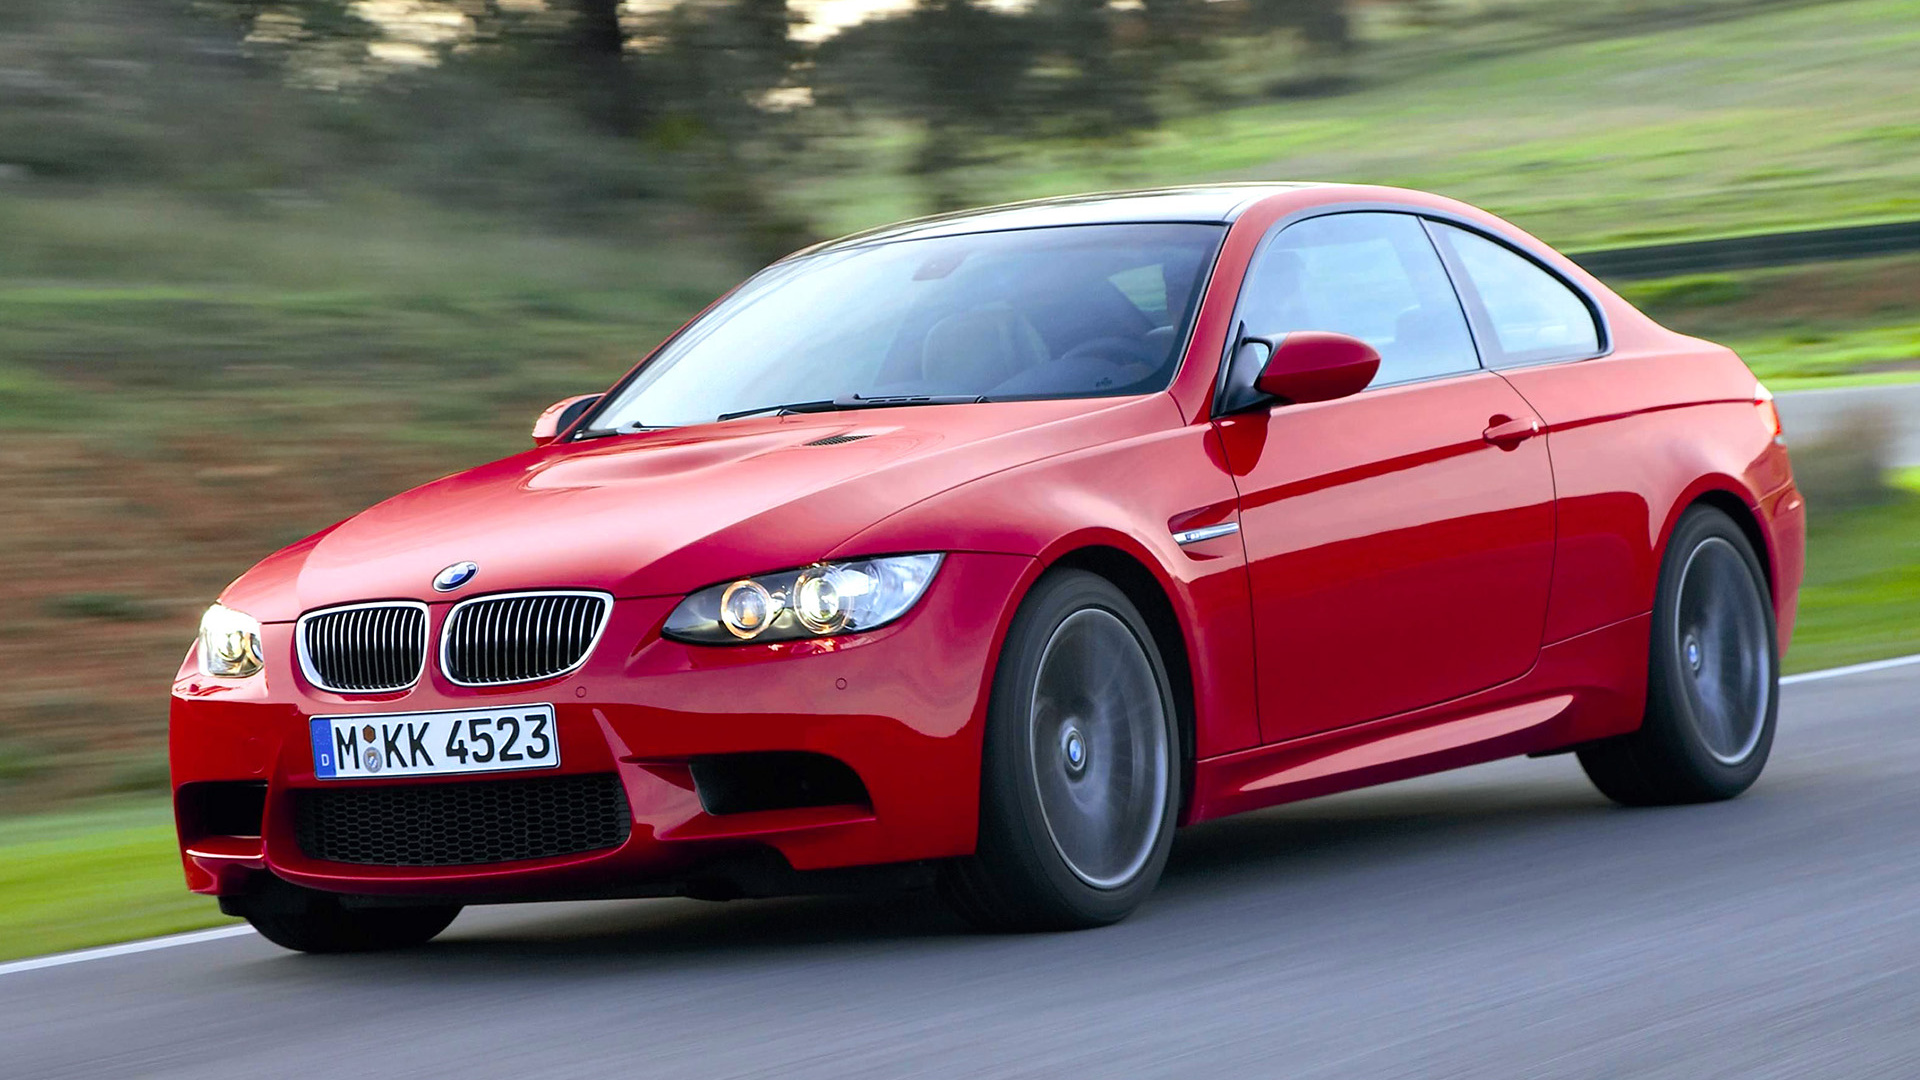 Red Bmw m 3 on Road During Daytime. Wallpaper in 1920x1080 Resolution